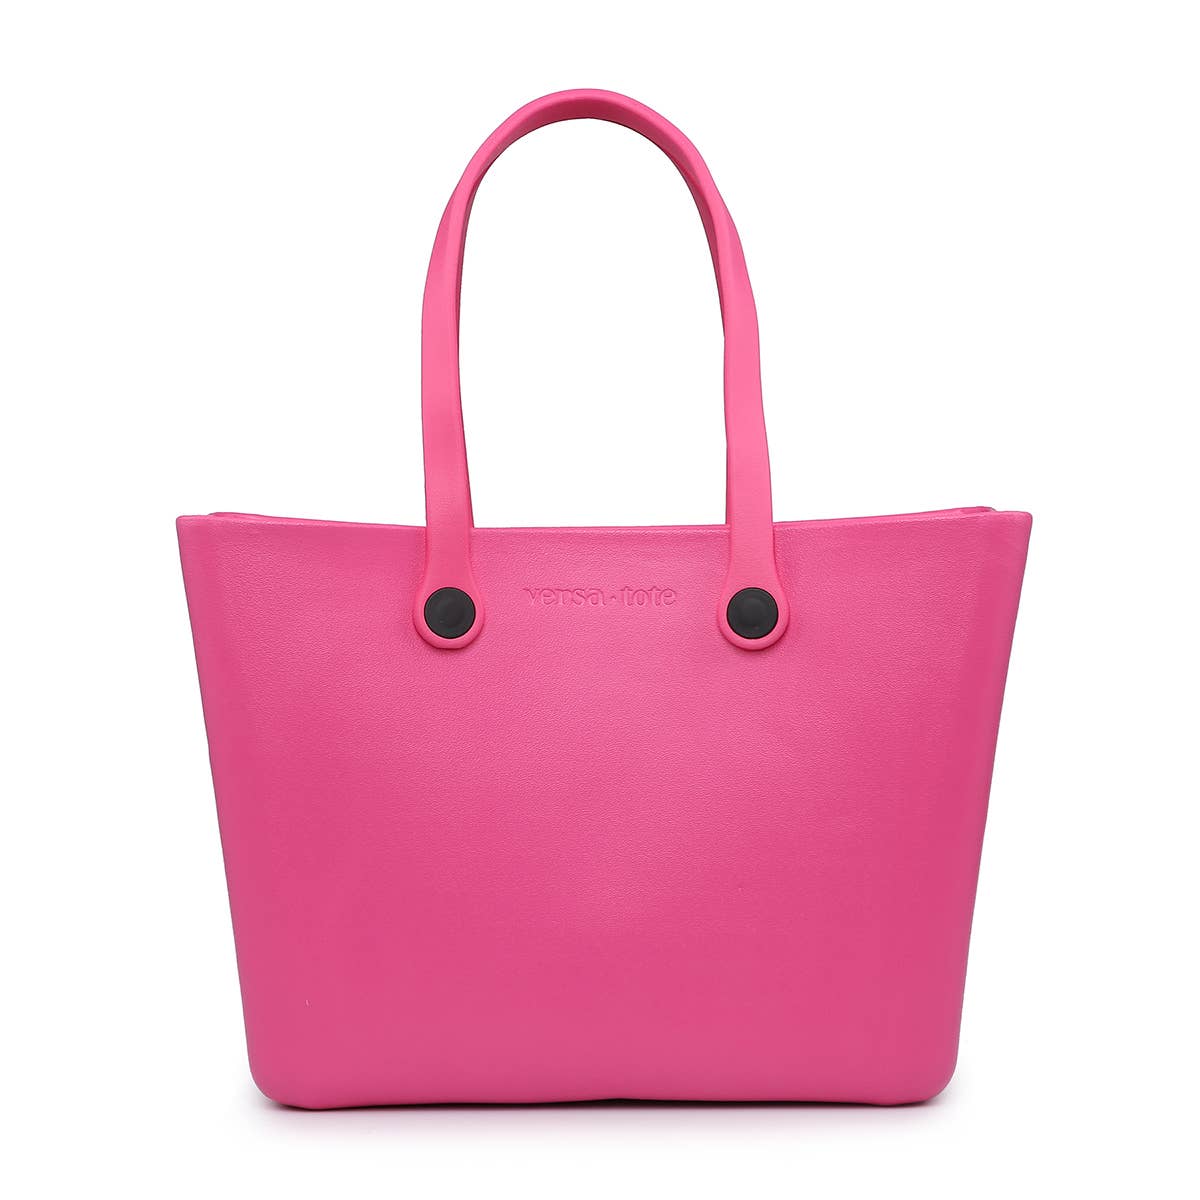 V2023 Carrie Versa Tote w/ Interchangeable Straps